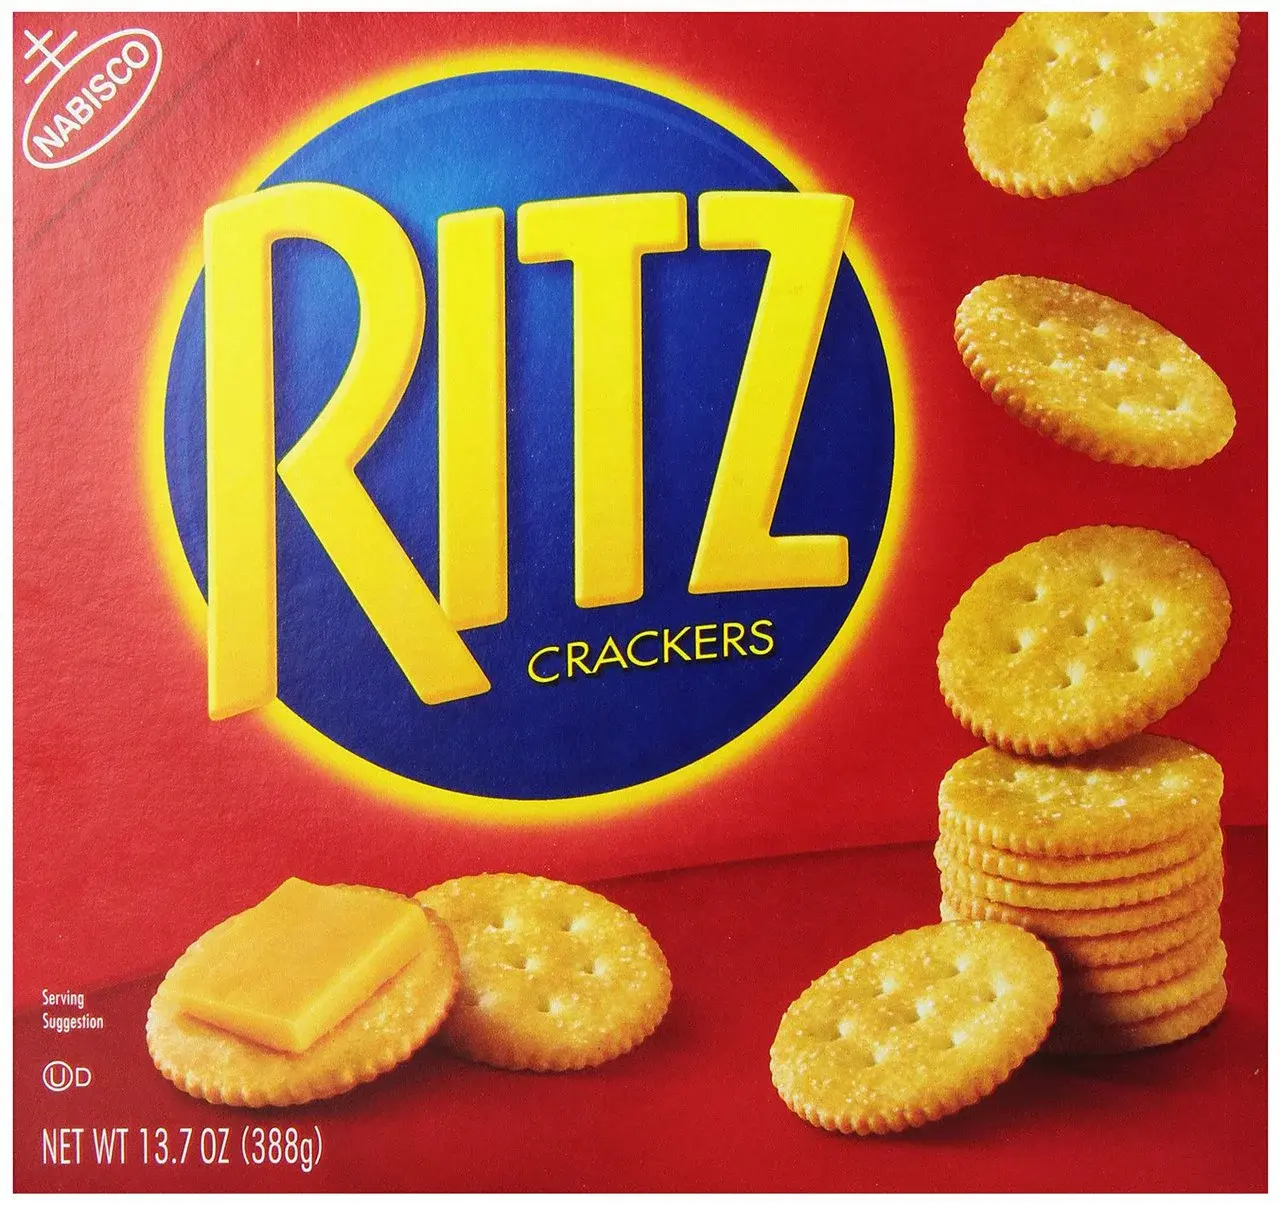 How Long Do Ritz Crackers Last After Expiration Date?